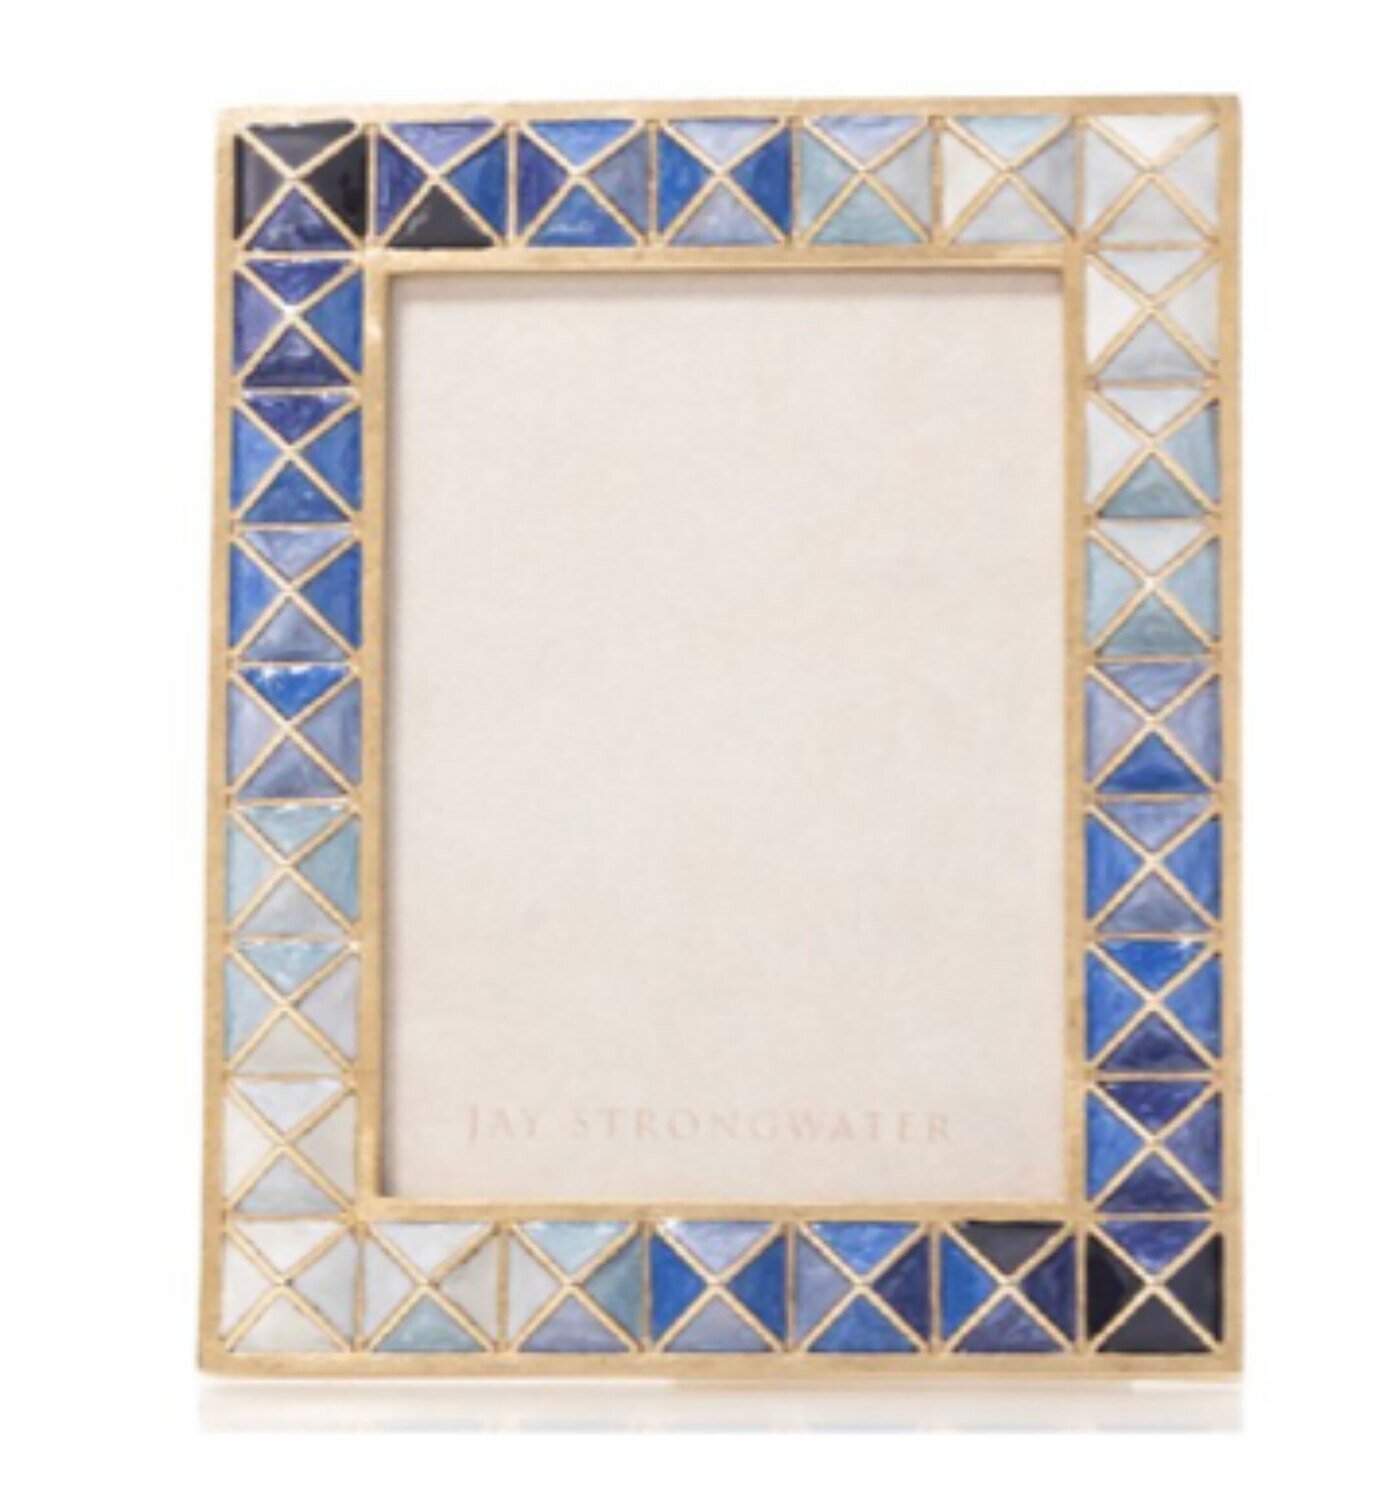 Jay Strongwater Abaculus 3 x 4 Indigo Pyramid Picture Frame SPF5876-284